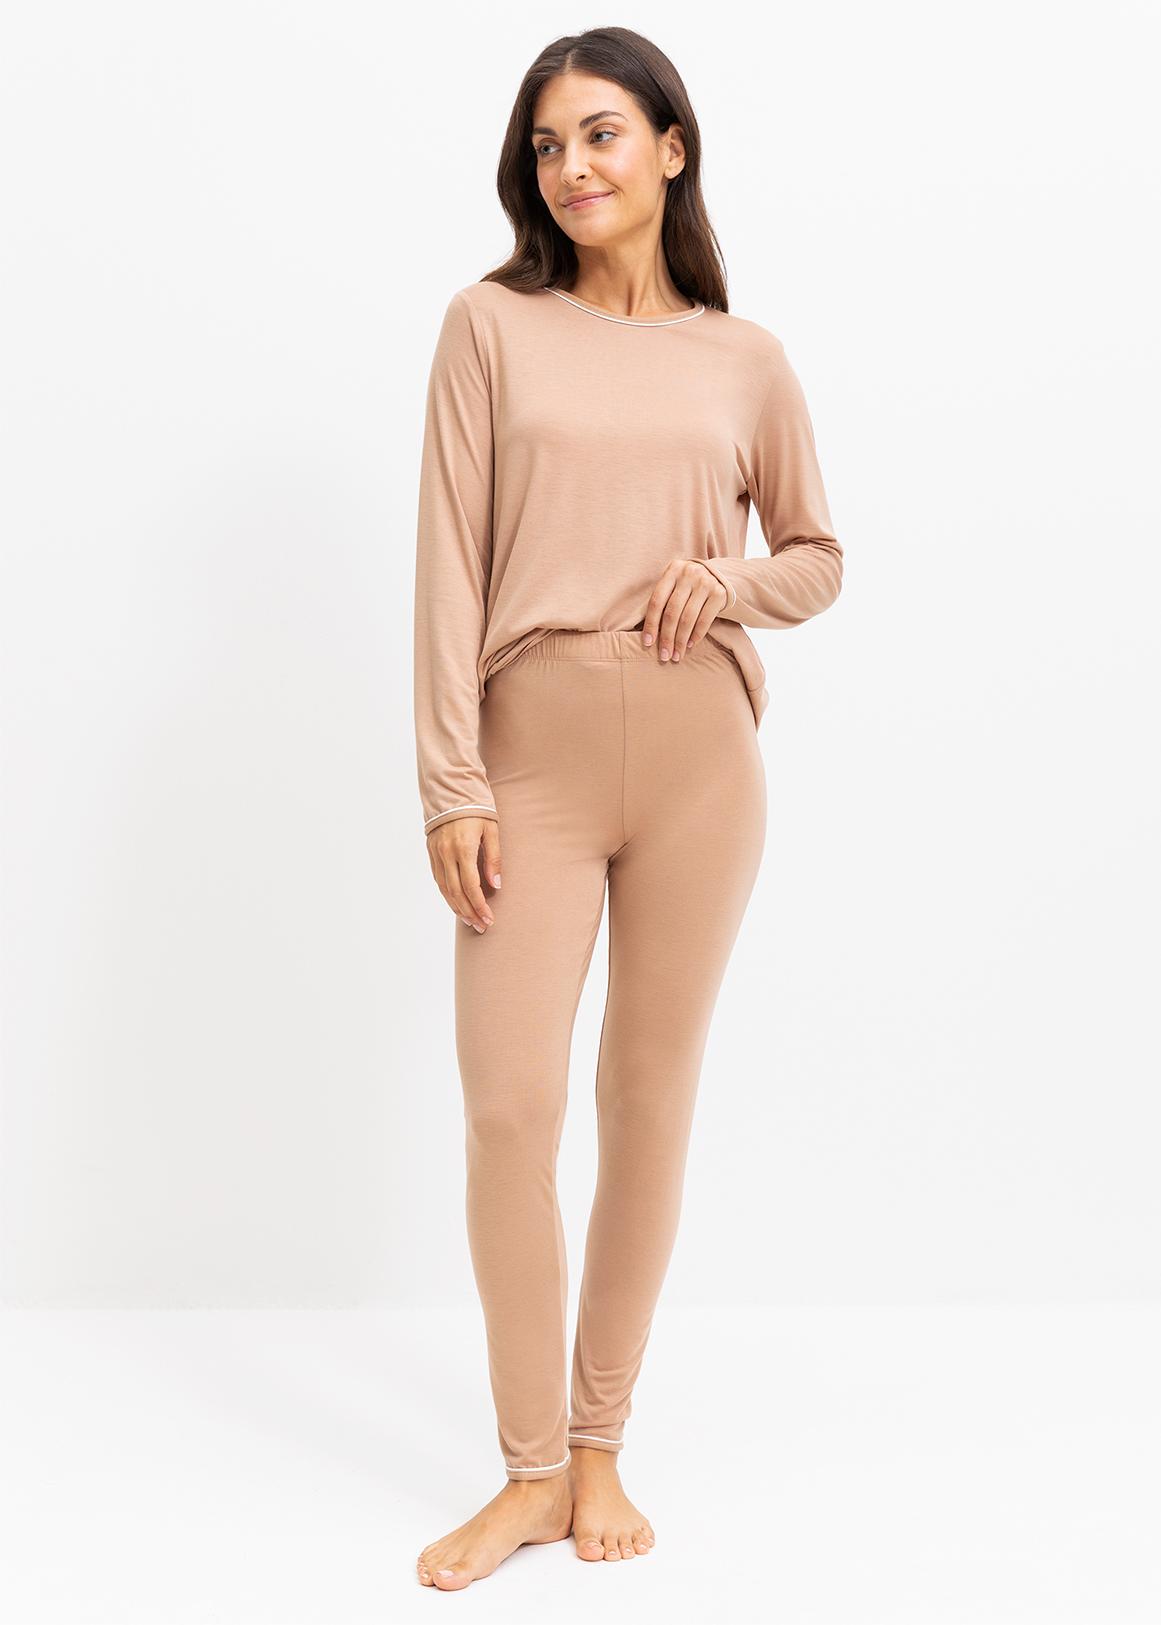 Cable Knit Barefoot Leggings - M / Beige